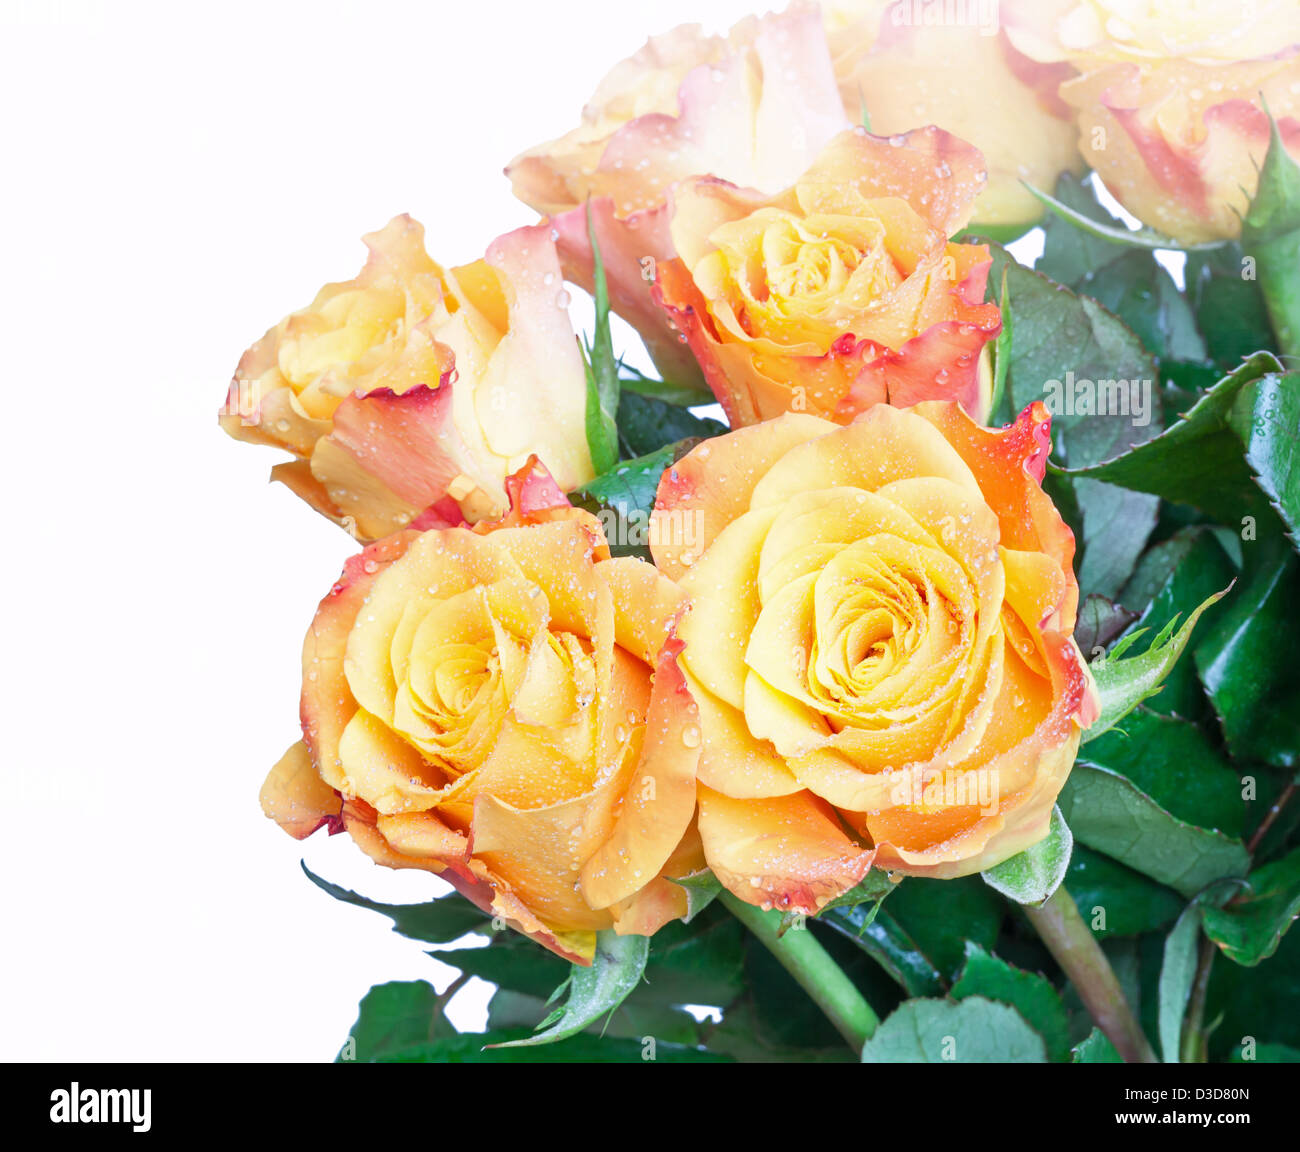 Orange and yellow roses bouquet fragment isolated on white Stock Photo